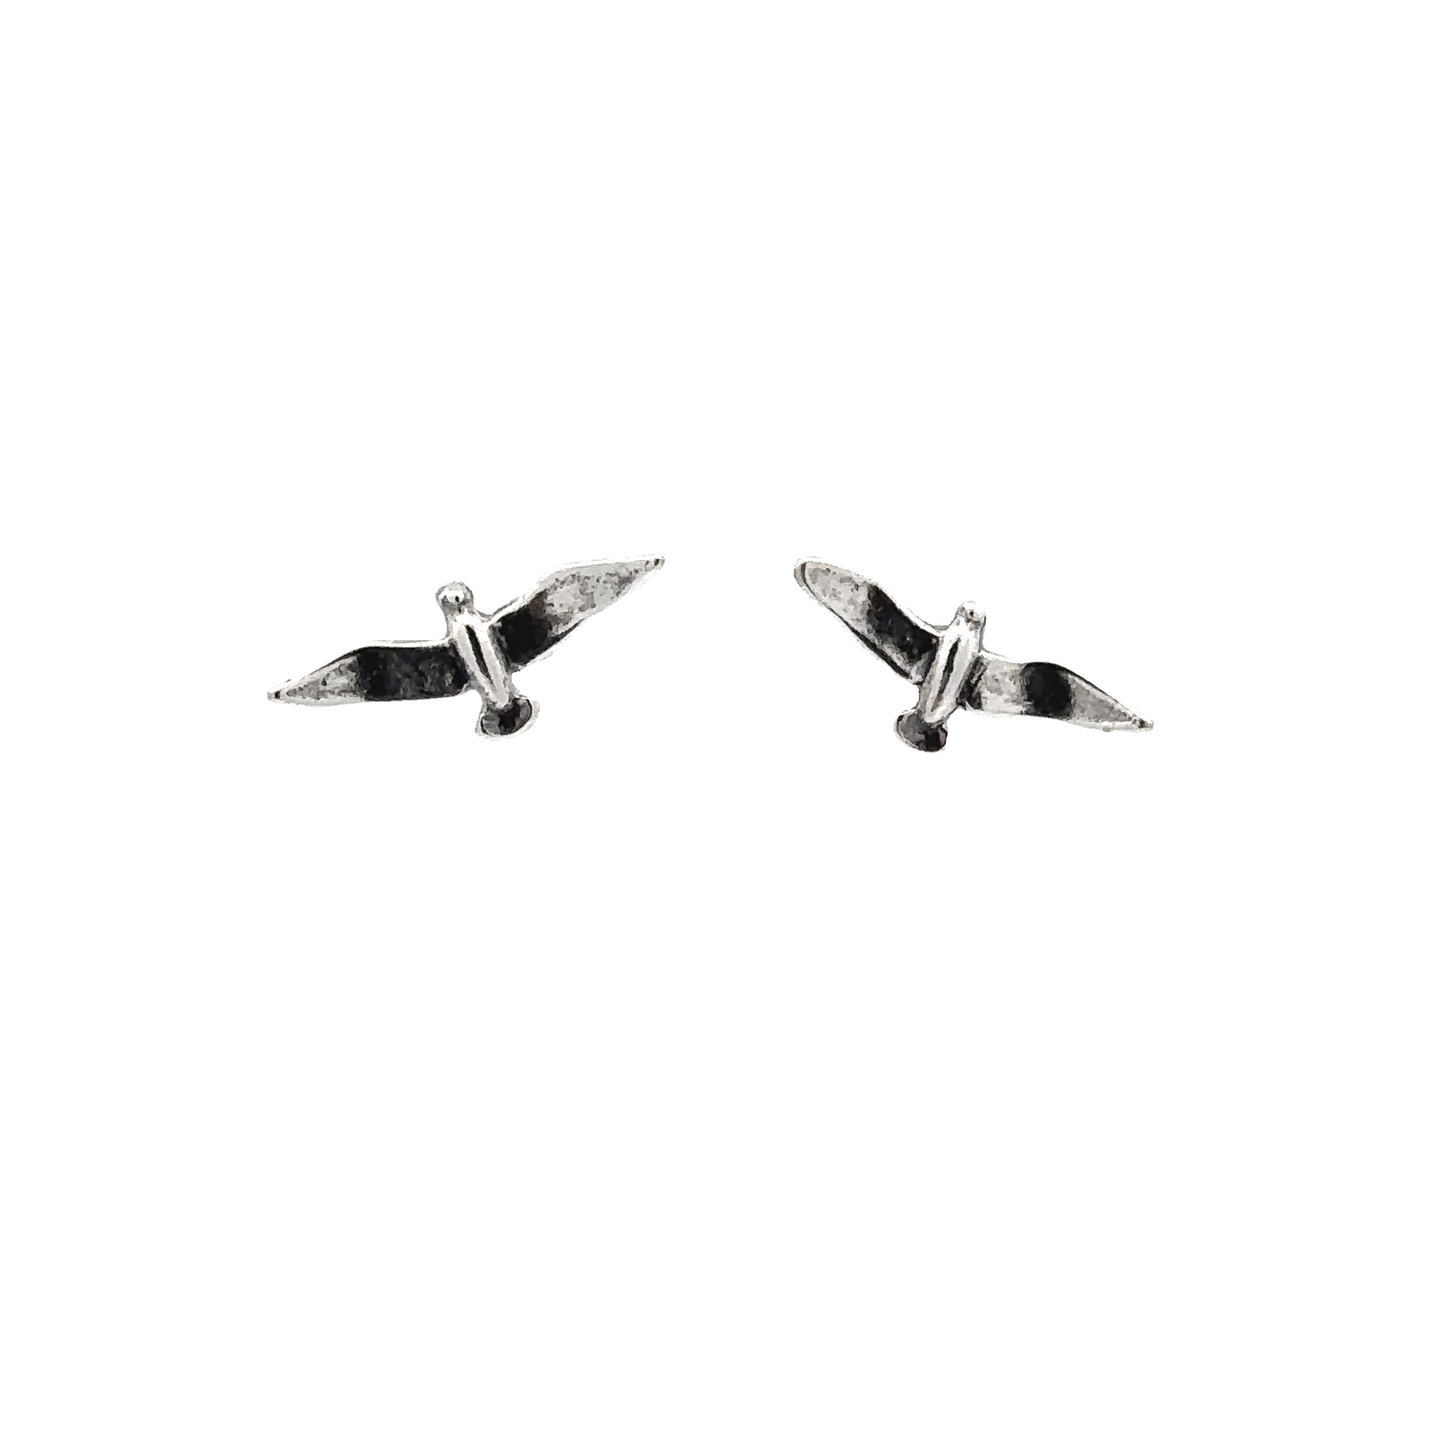 A pair of Seagull Studs on a white background.